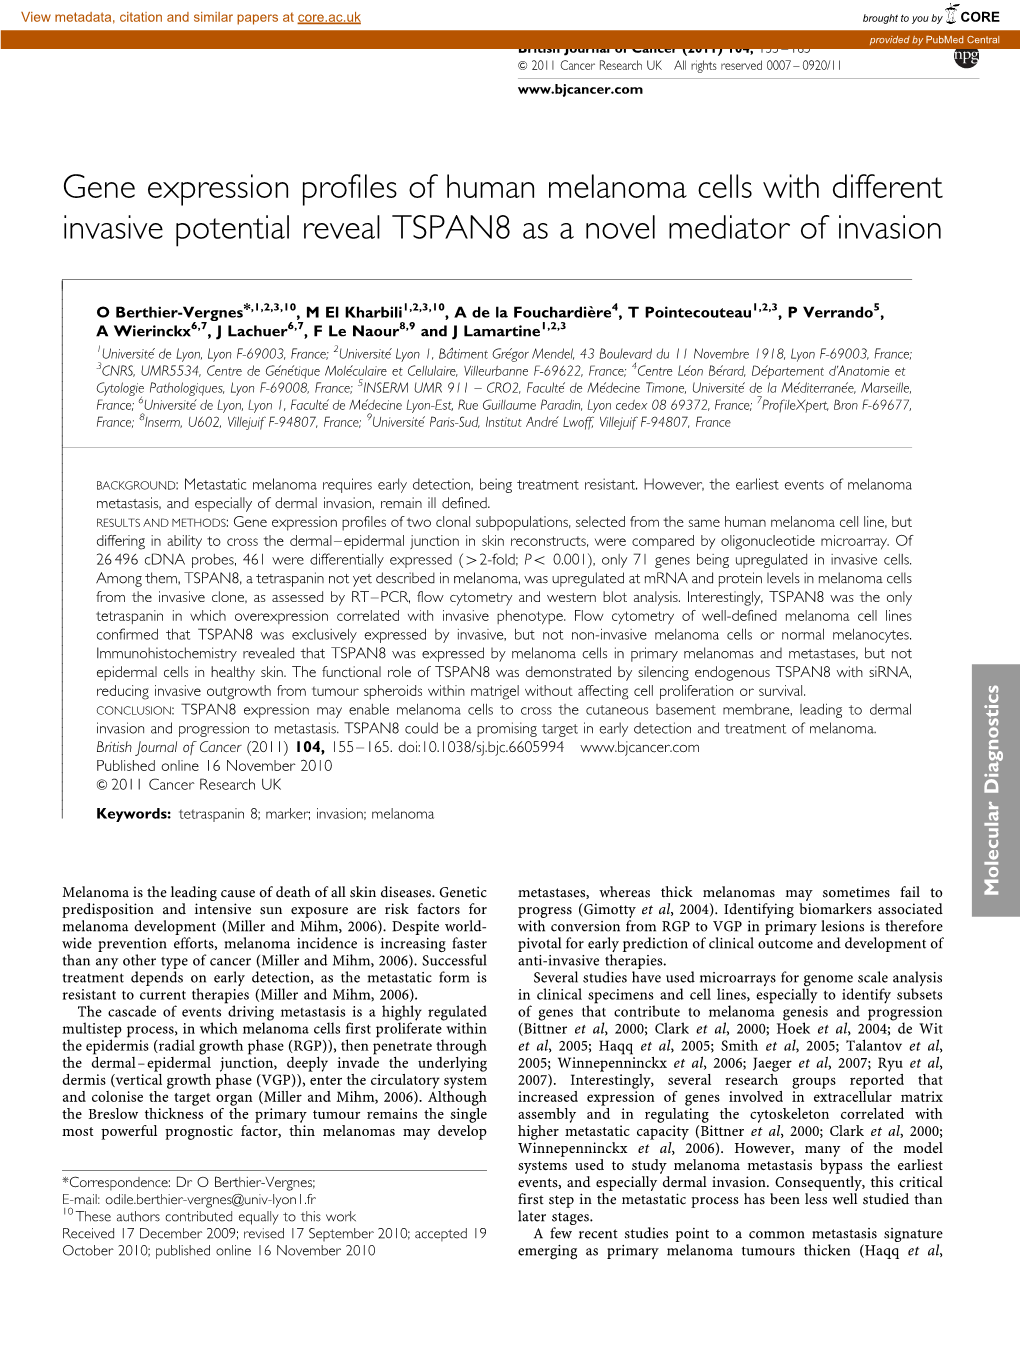 Gene Expression Profiles of Human Melanoma Cells with Different Invasive Potential Reveal TSPAN8 As a Novel Mediator of Invasion